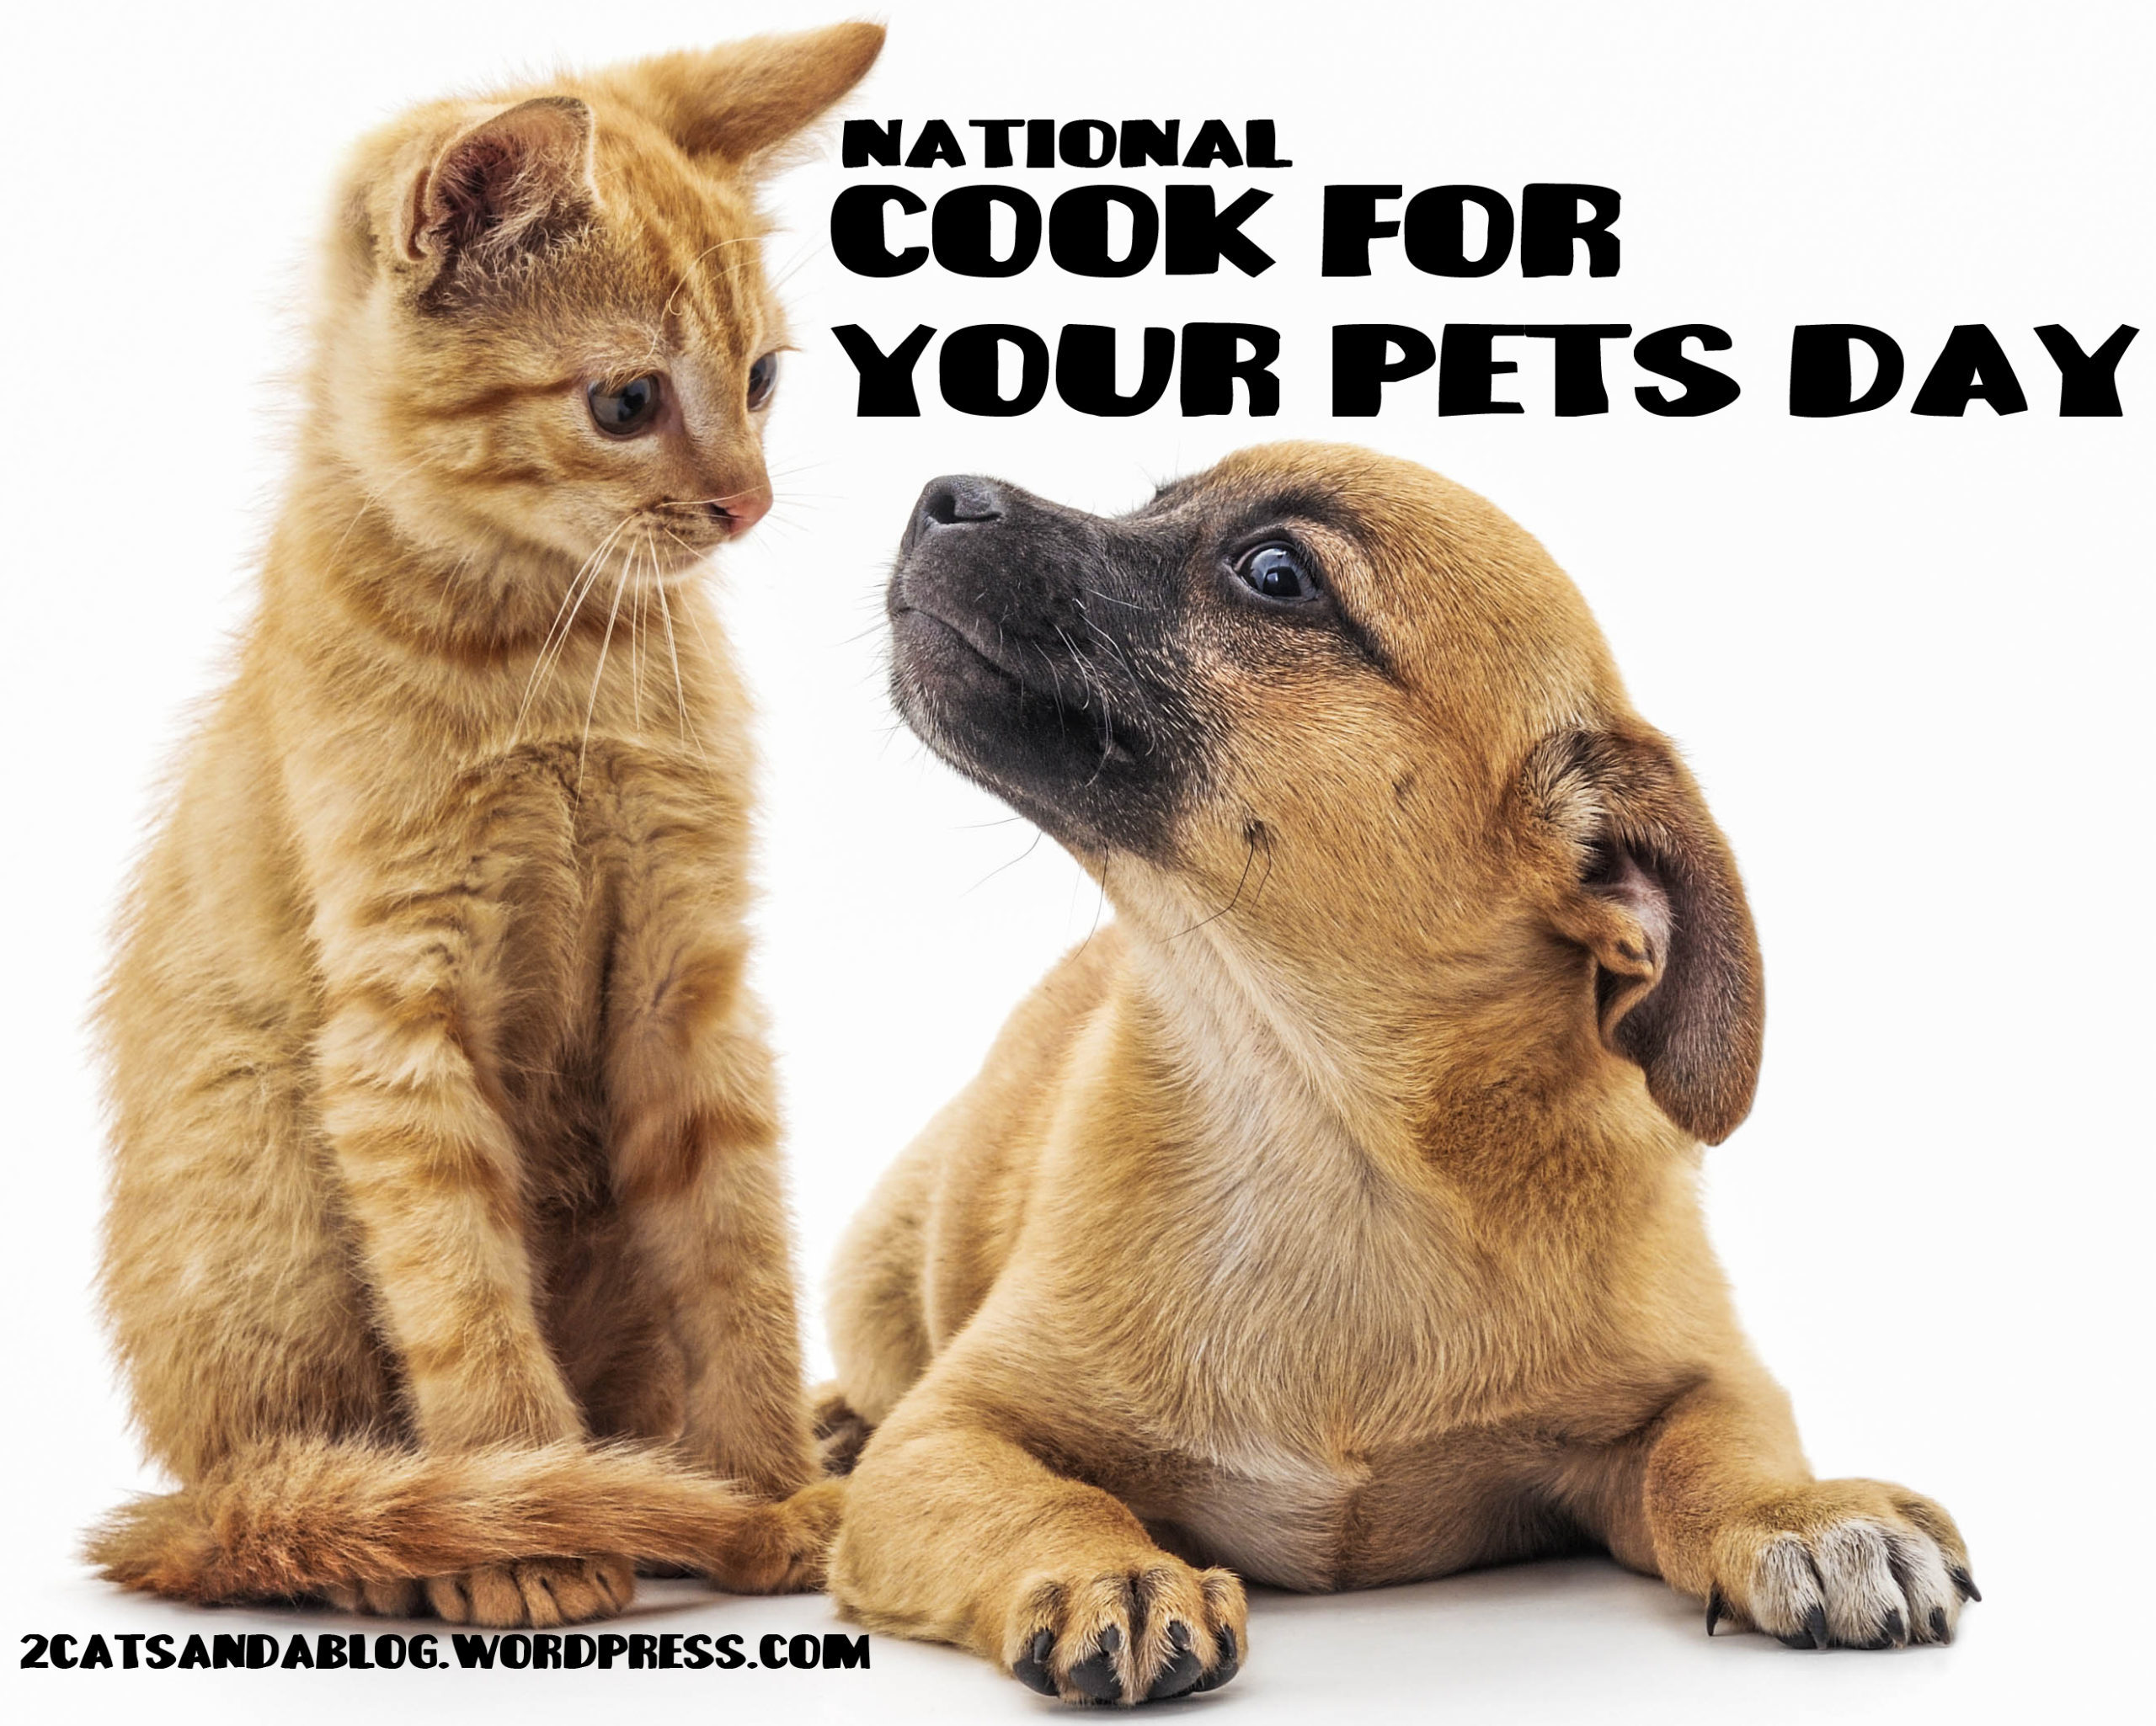 National-Cook-For-Your-Pets-Day